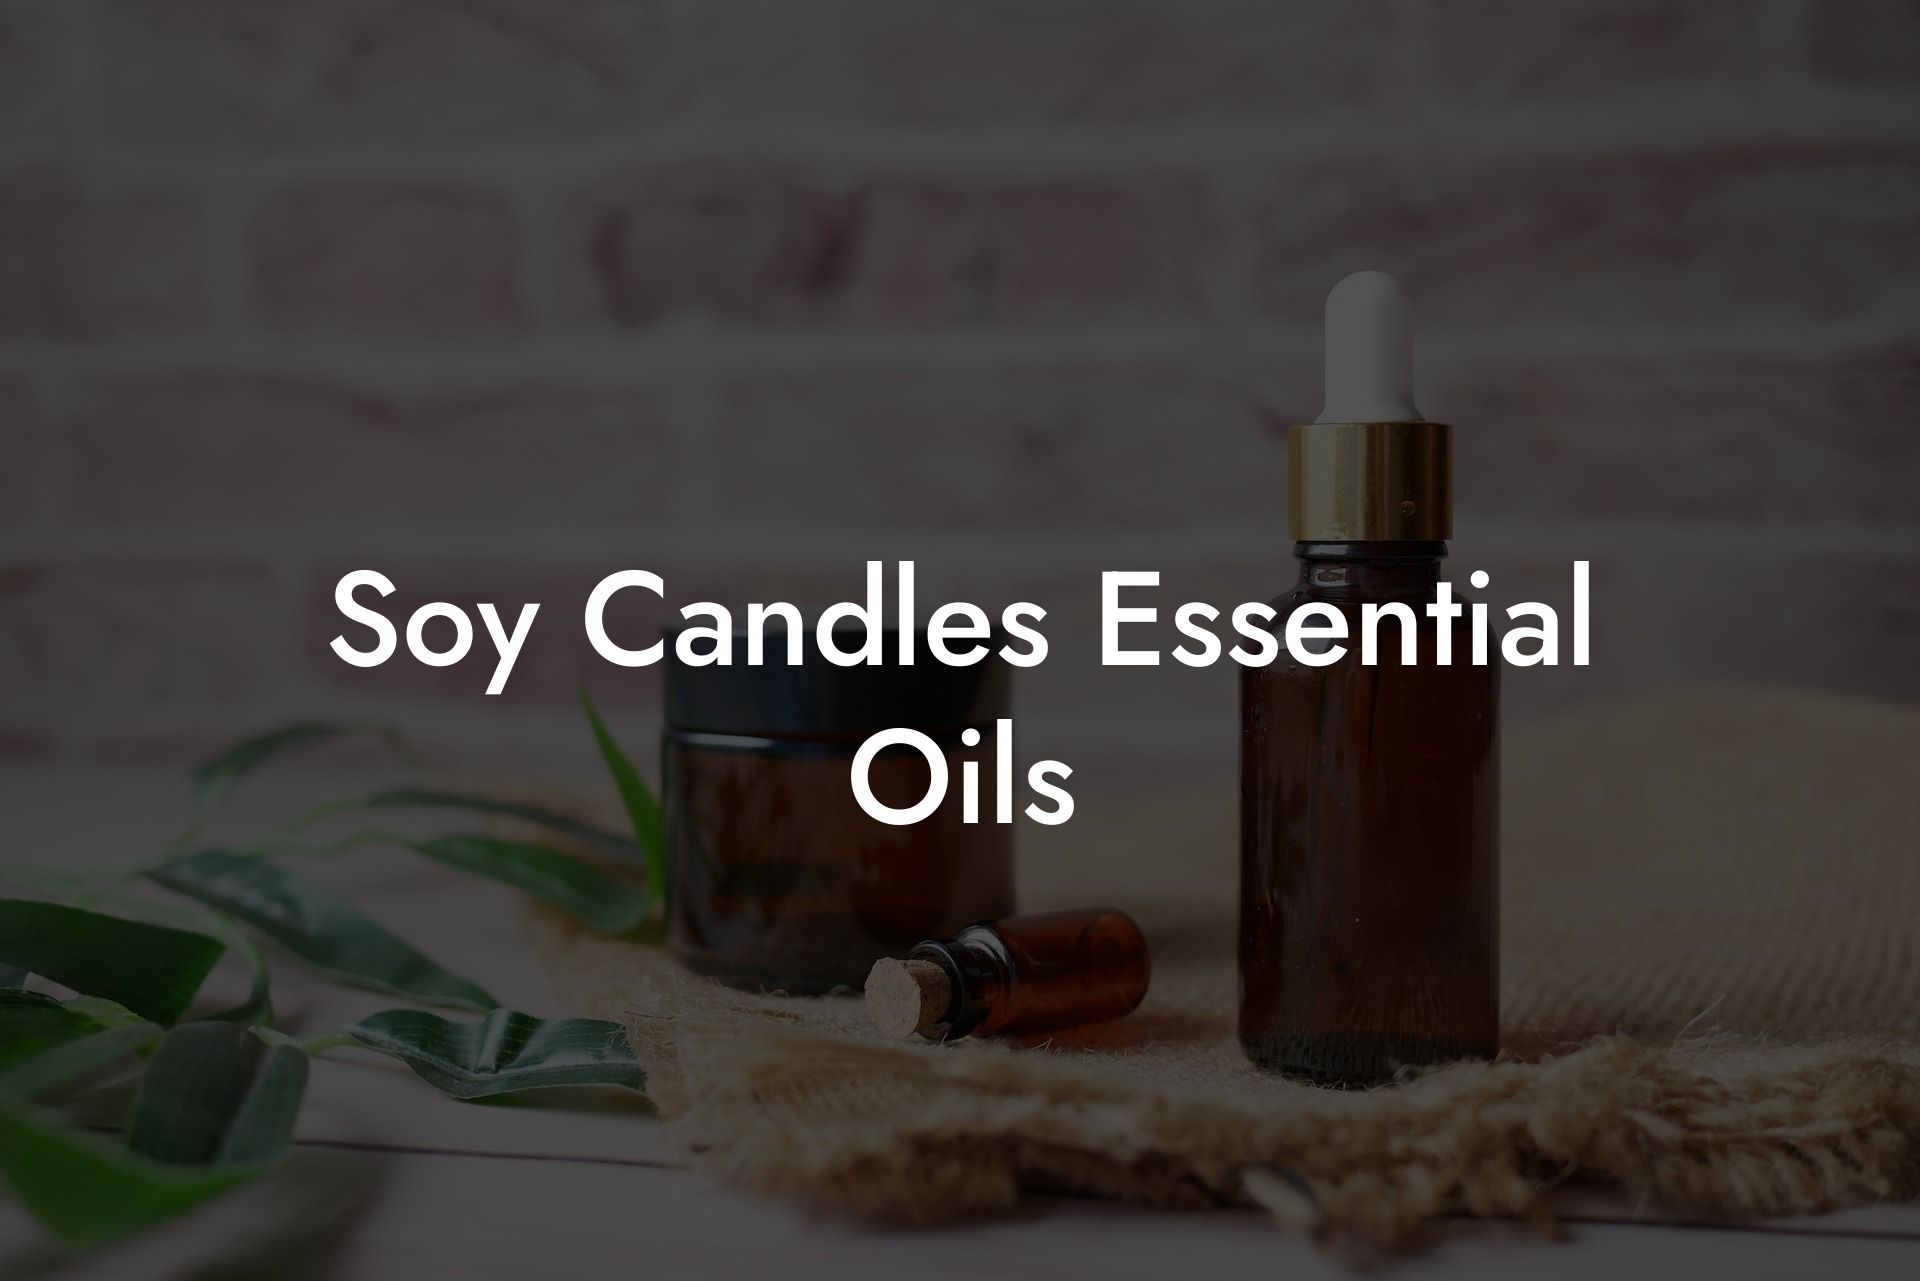 Soy Candles Essential Oils